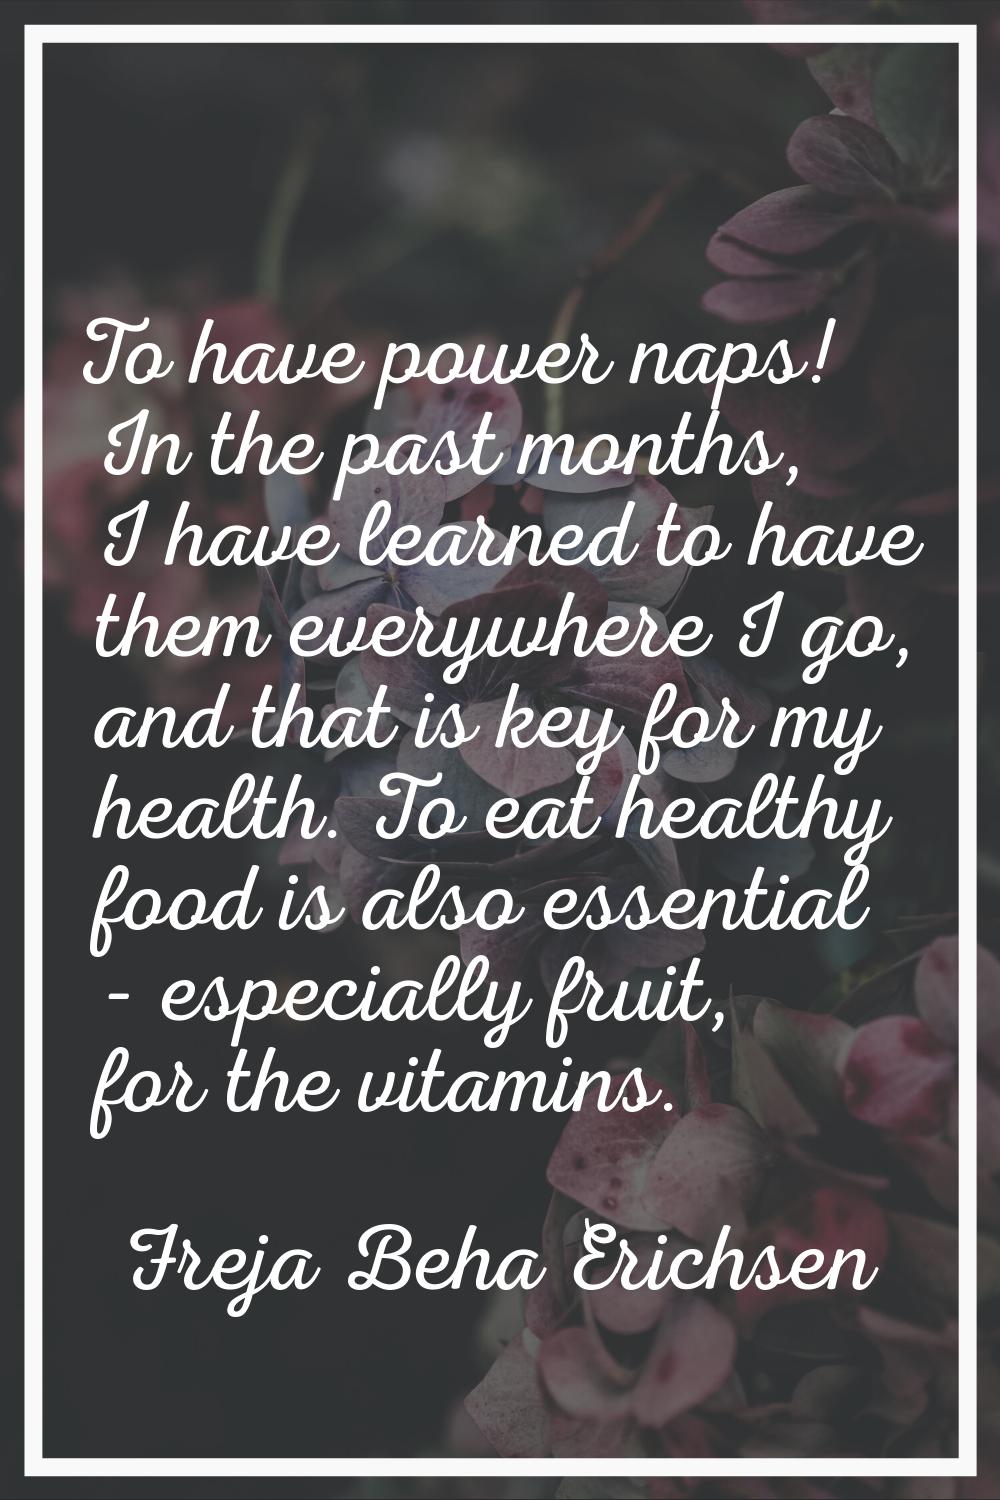 To have power naps! In the past months, I have learned to have them everywhere I go, and that is ke